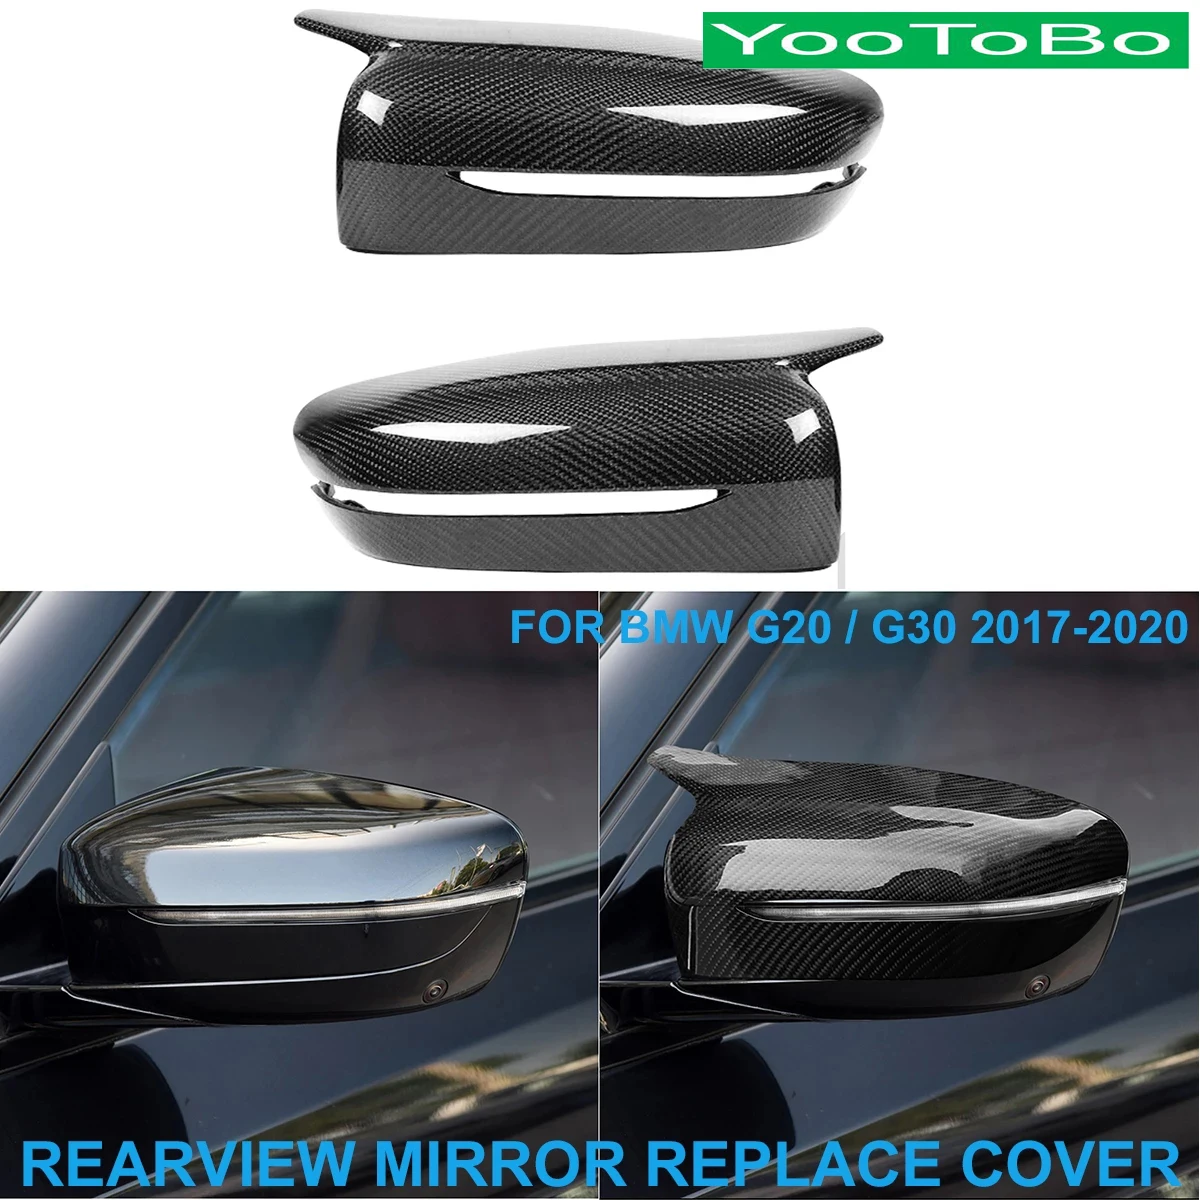 

LHD RHD Car Styling Real Dry Carbon Fiber Rearview Rear Side Mirror Cover Cap Shell Trim Replace For BMW NEW G20 G30 2017-2020